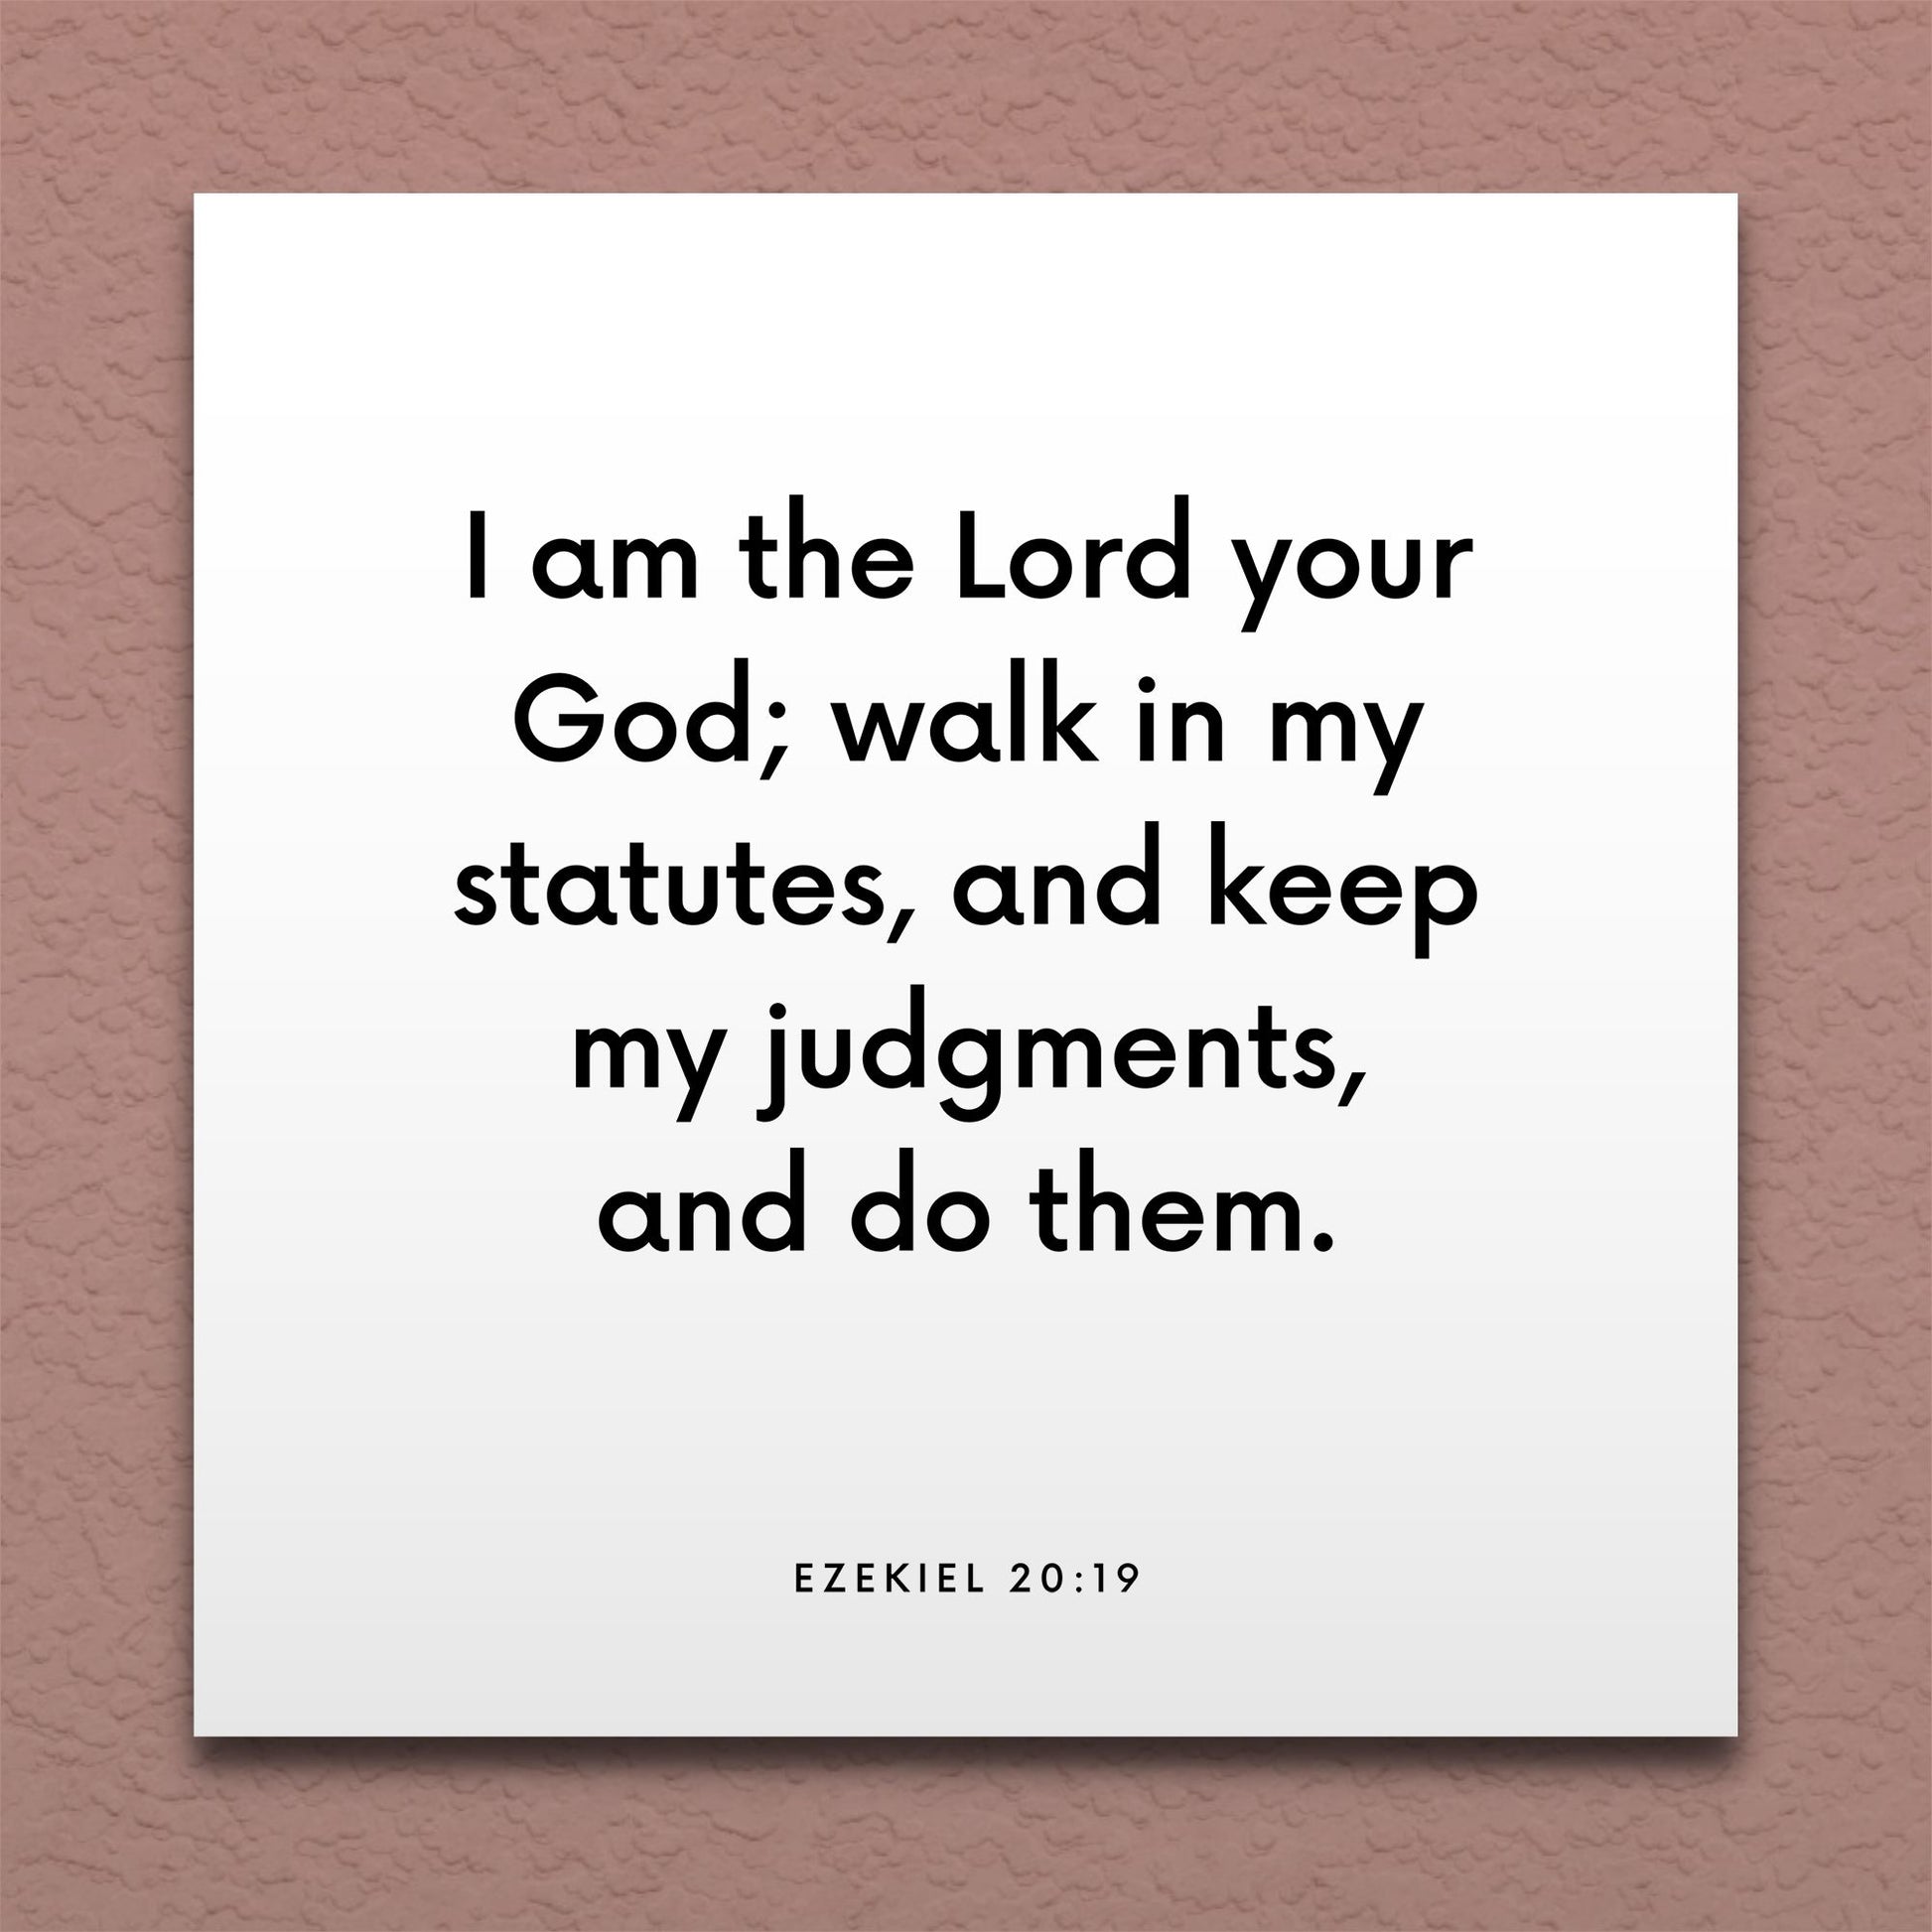 Wall-mounted scripture tile for Ezekiel 20:19 - "I am the Lord your God; walk in my statutes"